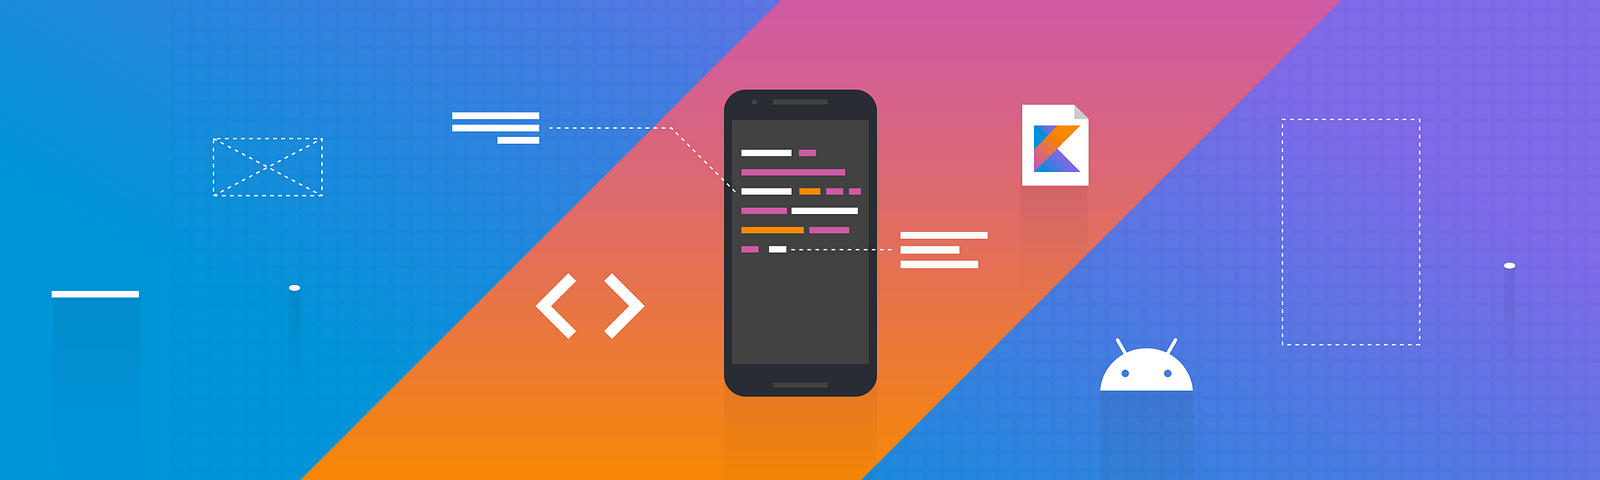 Illustration of mobile phone with Kotlin and Android logos around it.